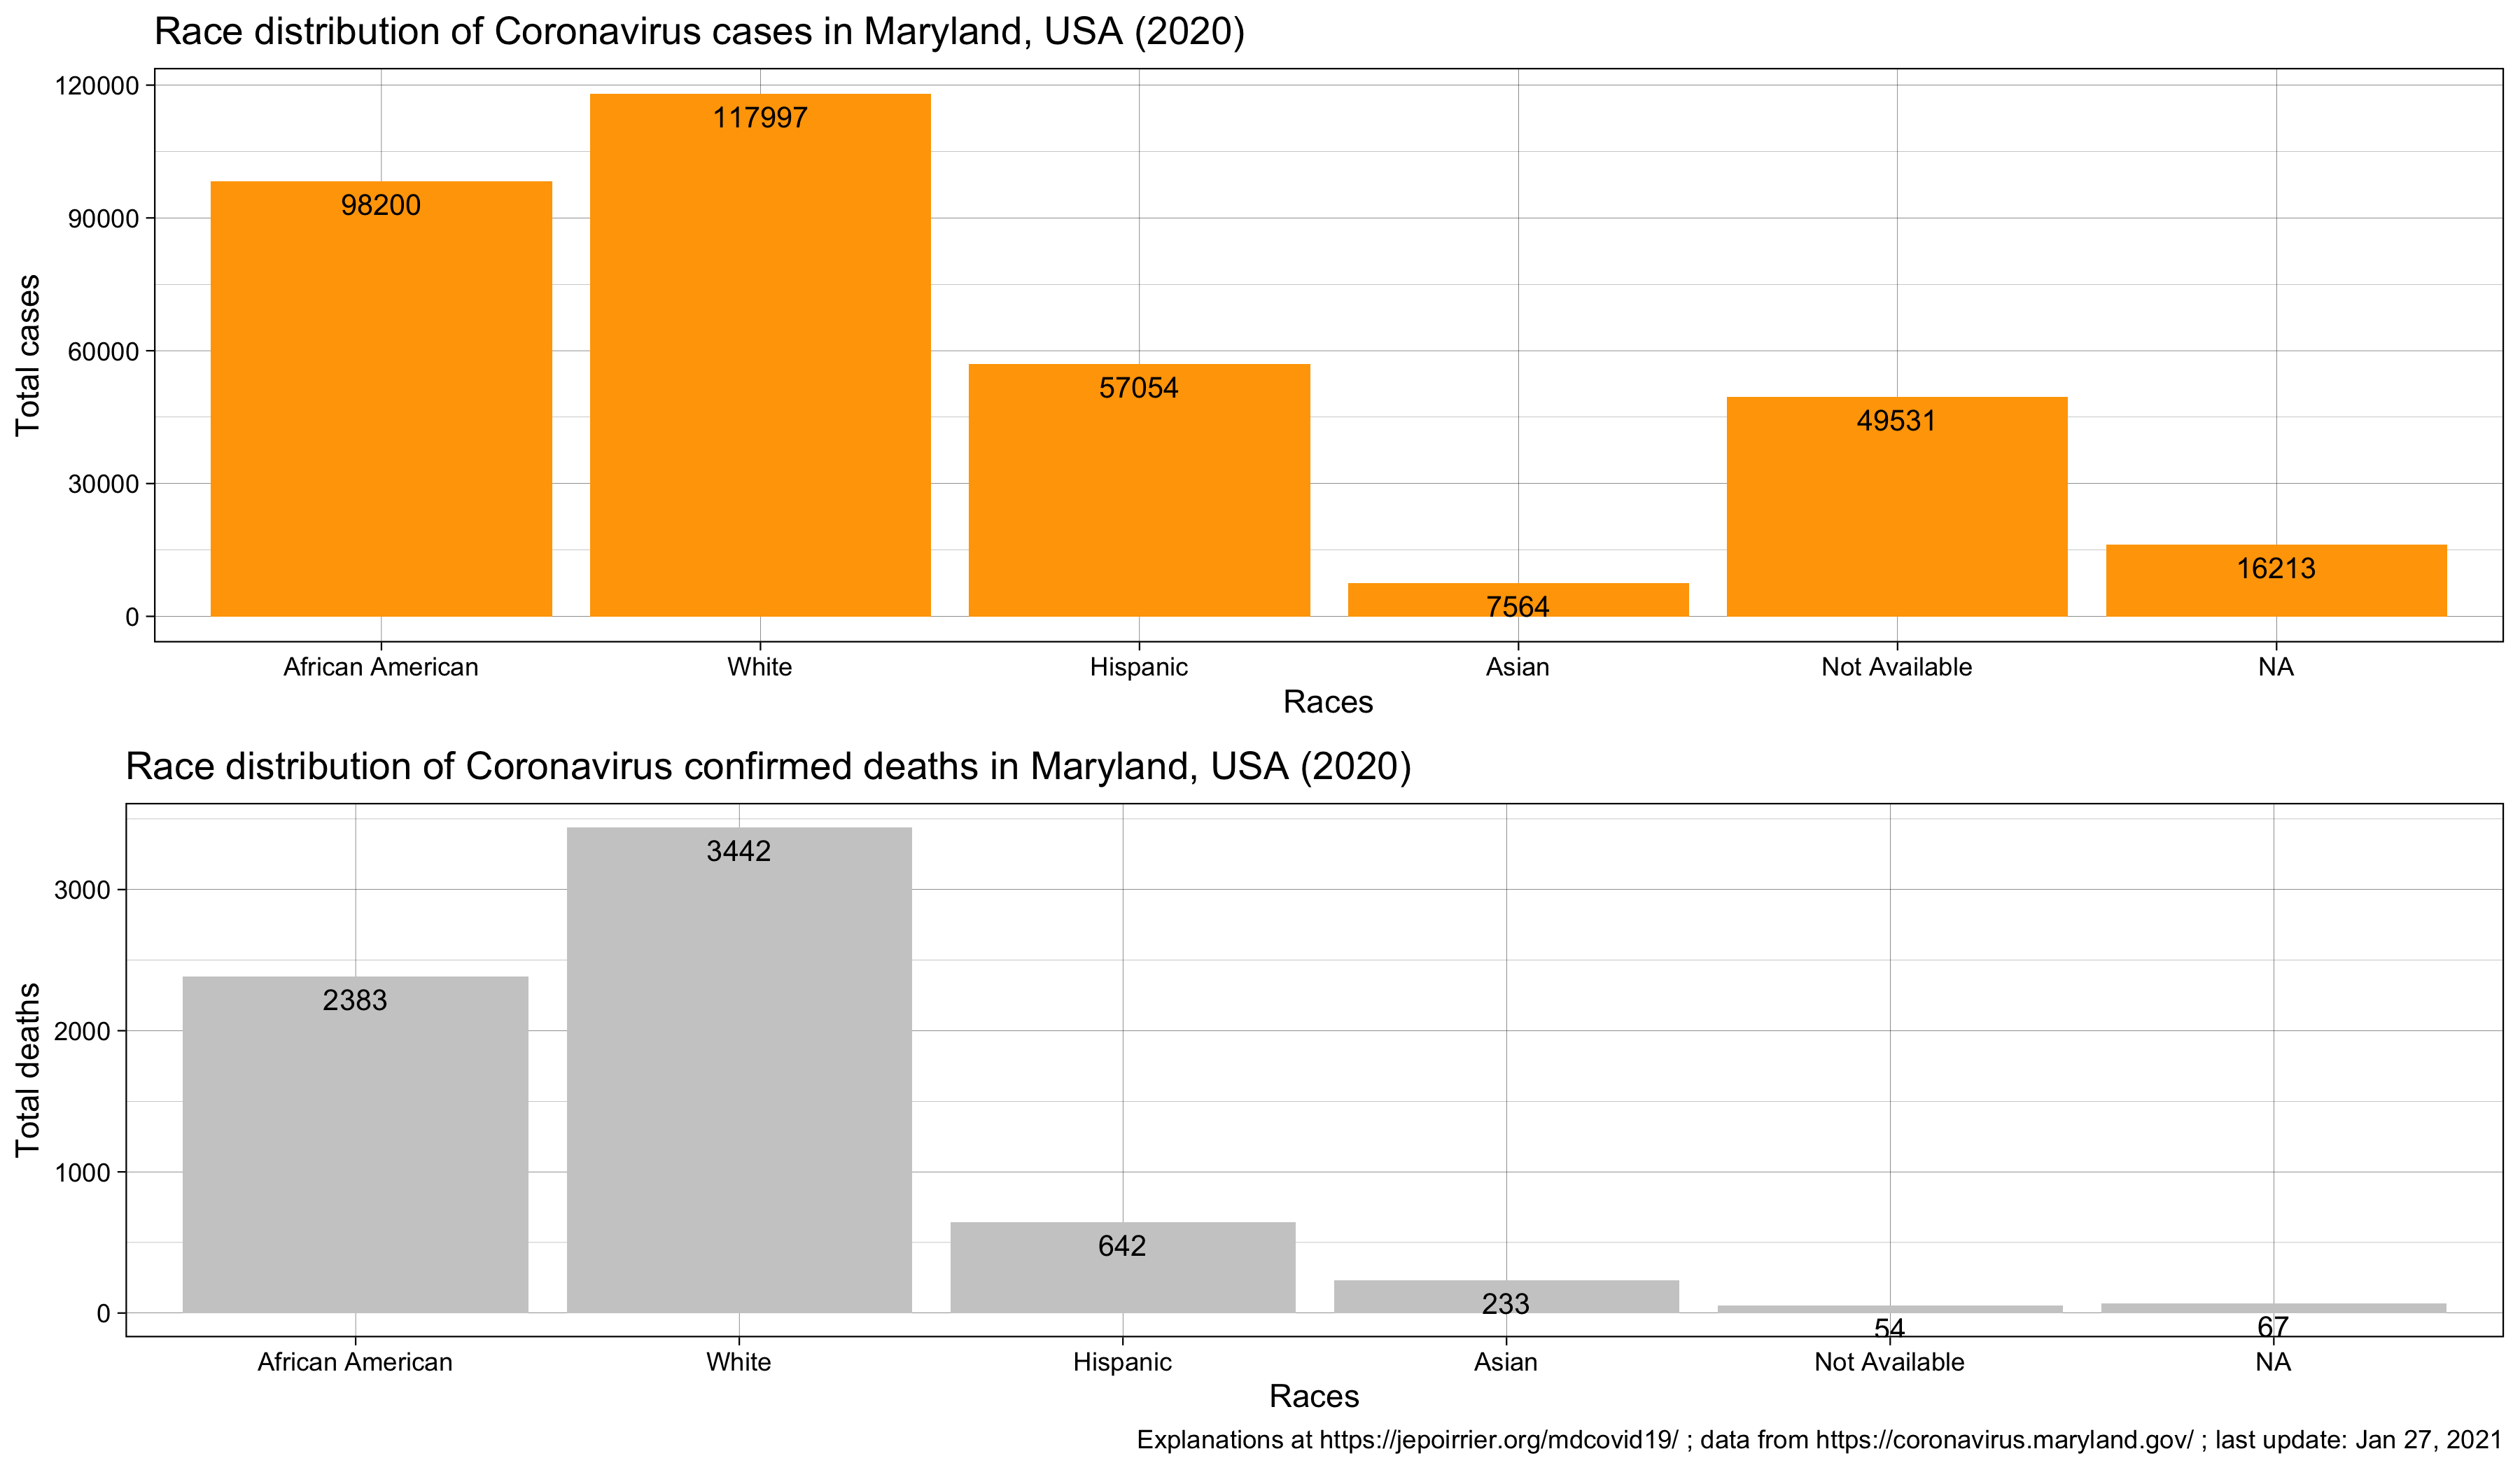 Race distribution of all Coronavirus cases and deaths in Maryland, USA, 2020